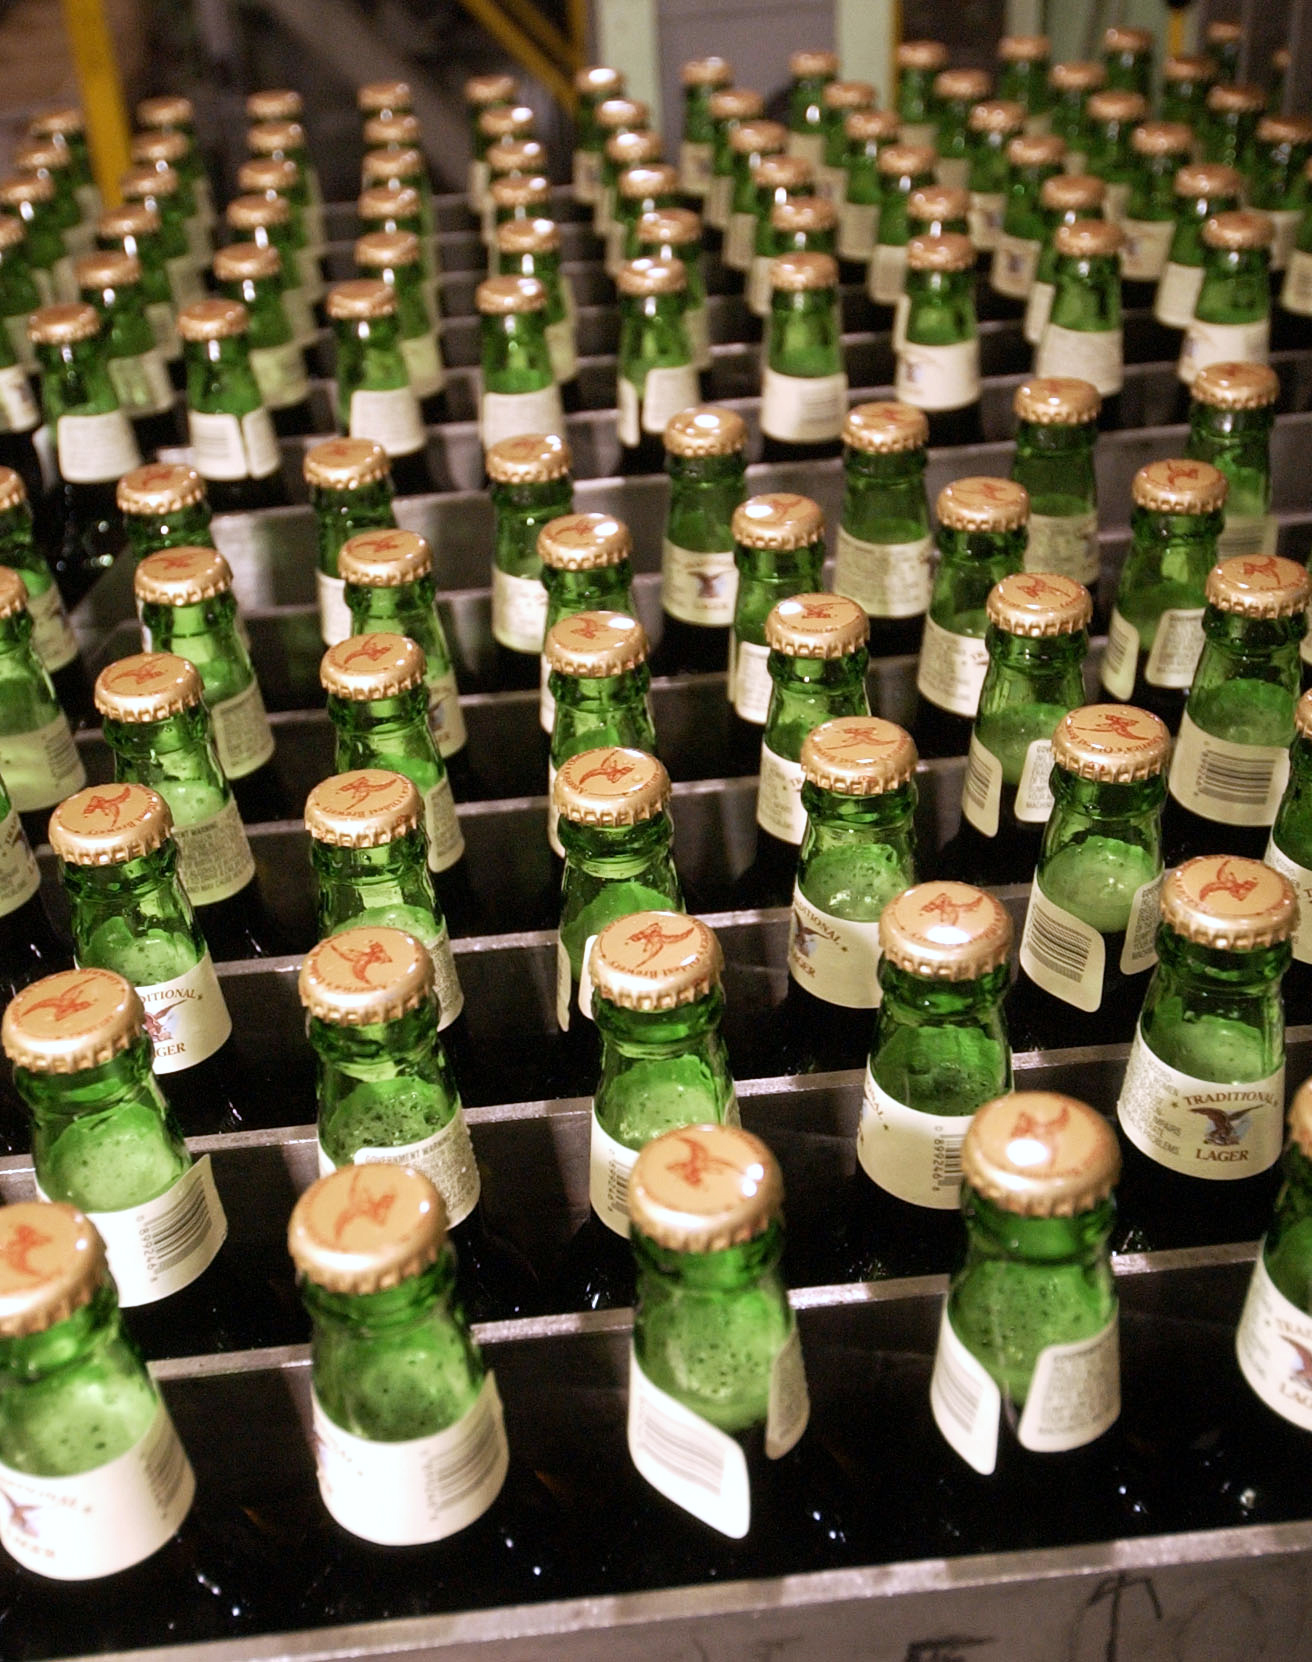 Full bottles of lager await to be loaded into cases at the Yuengling brewery in Pottsville, Pennsylvania on June 29, 2005.